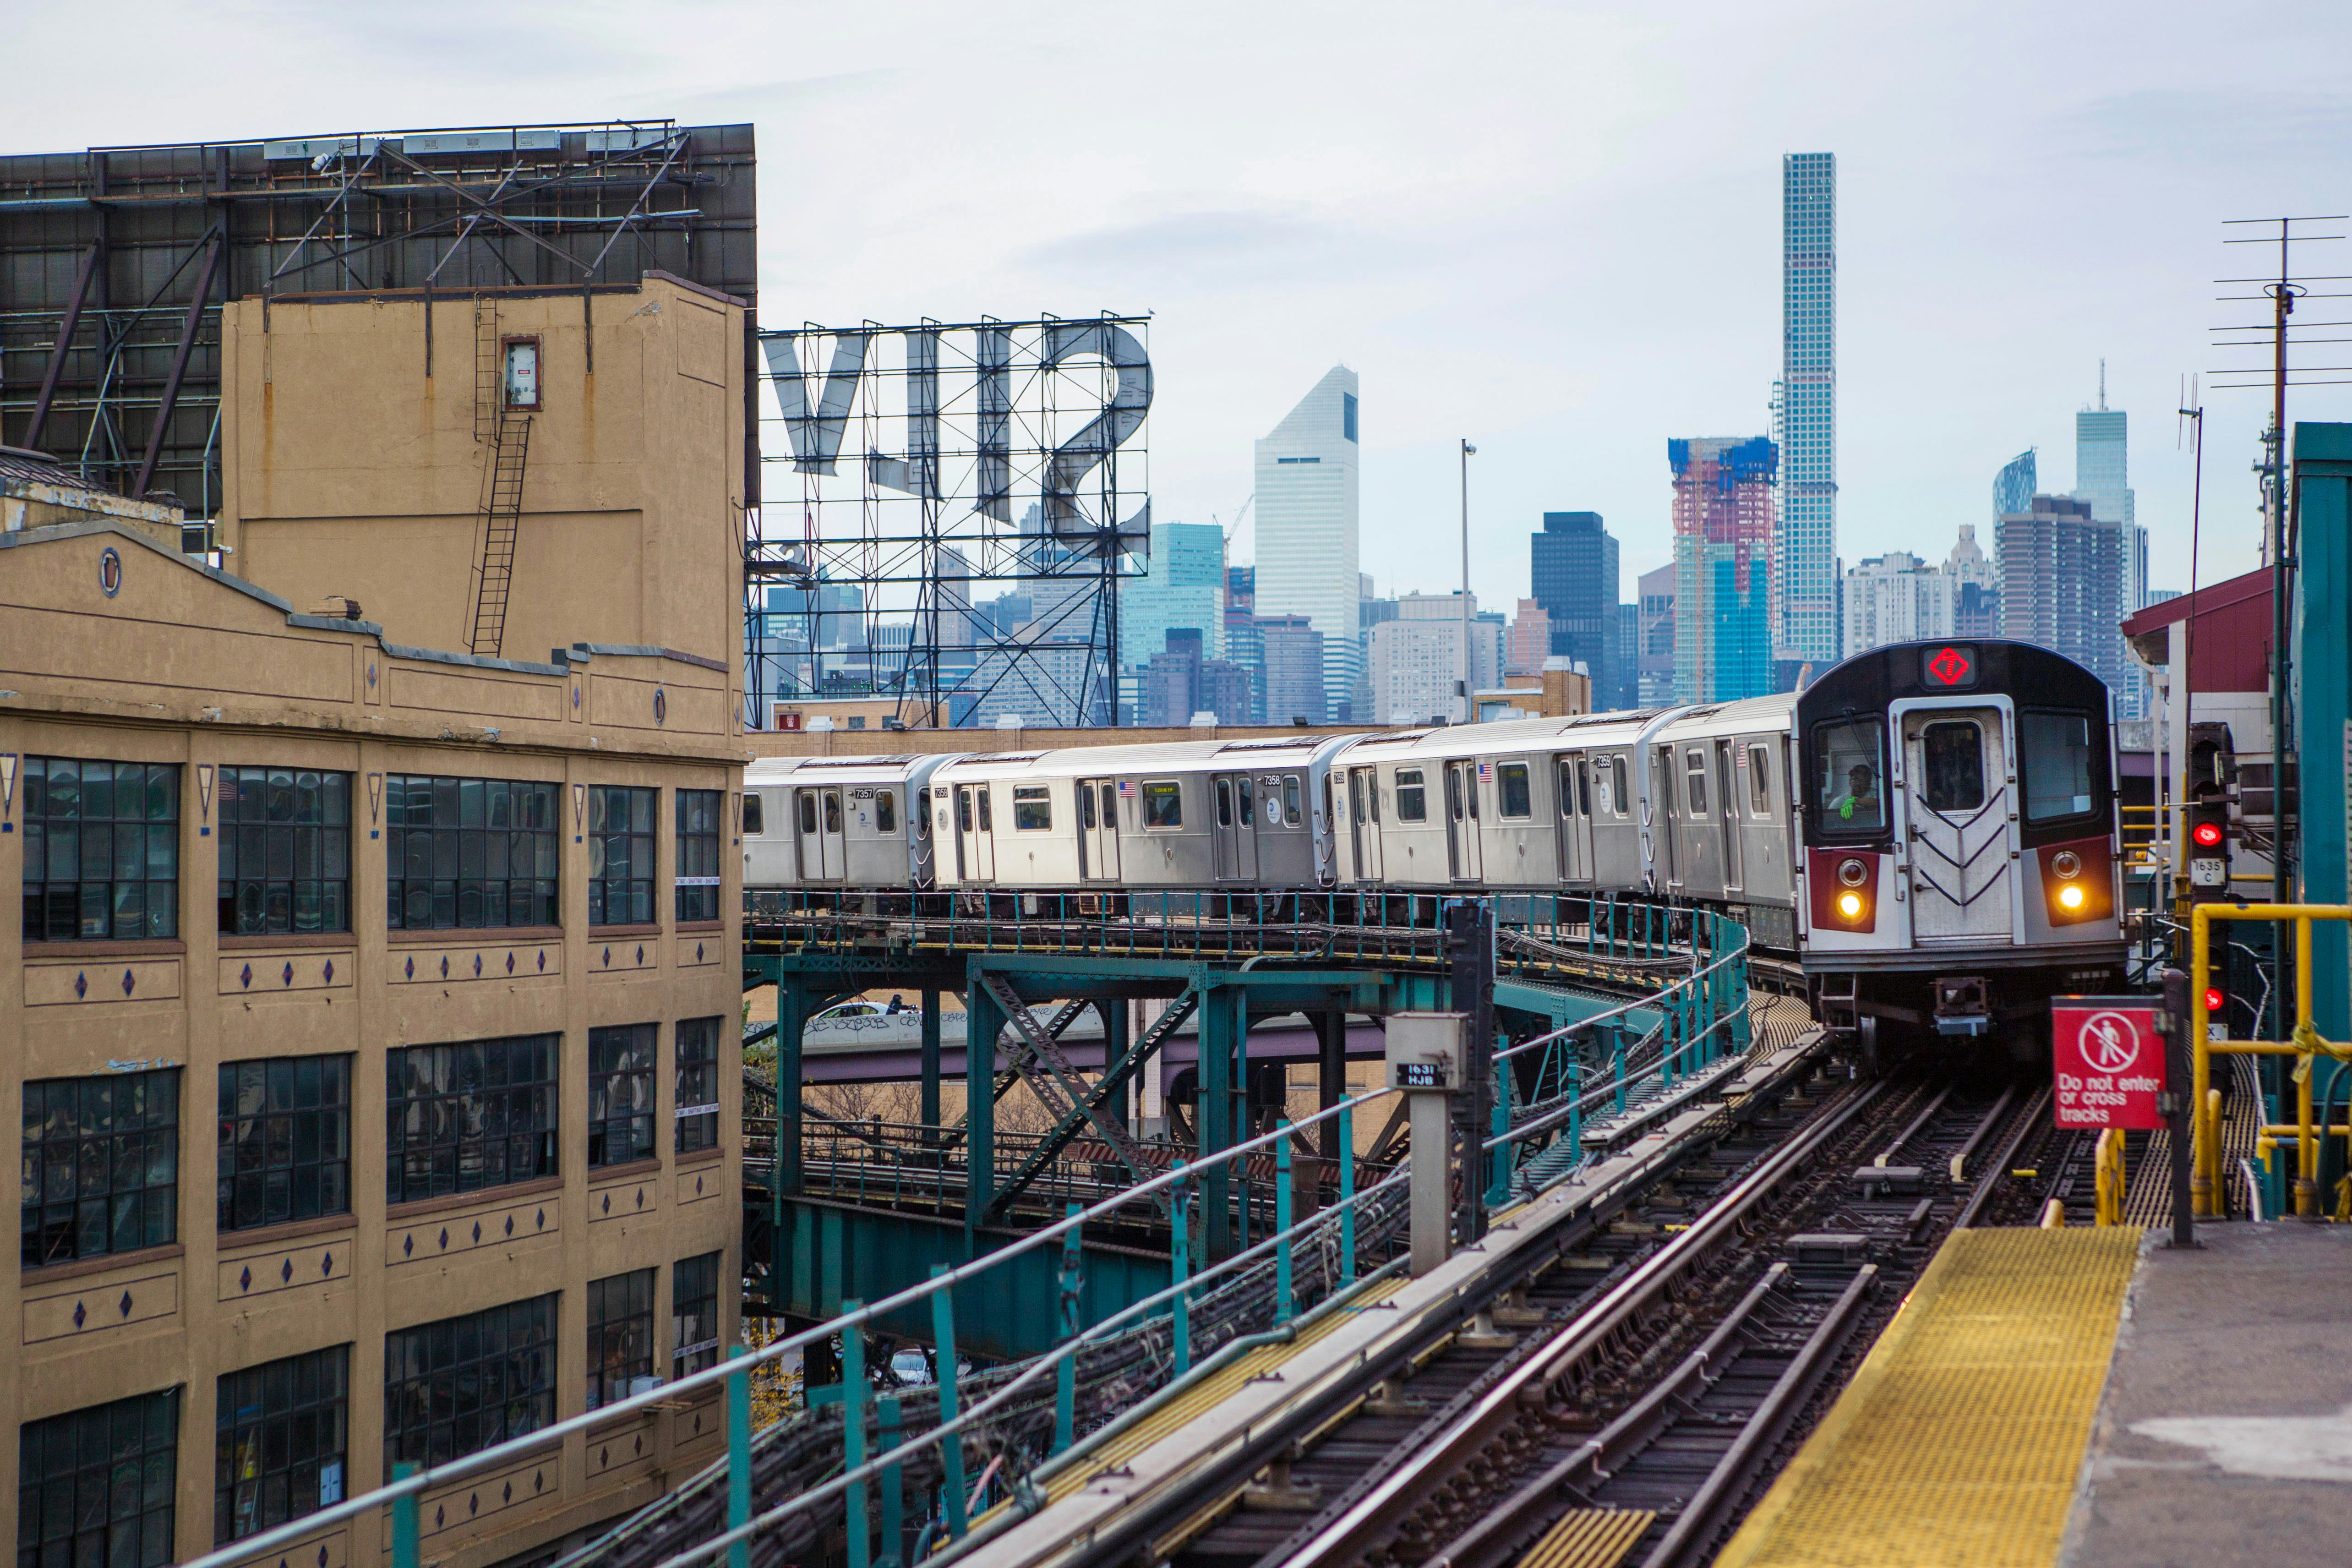 A subway train pulling into an elevated platform in NYC